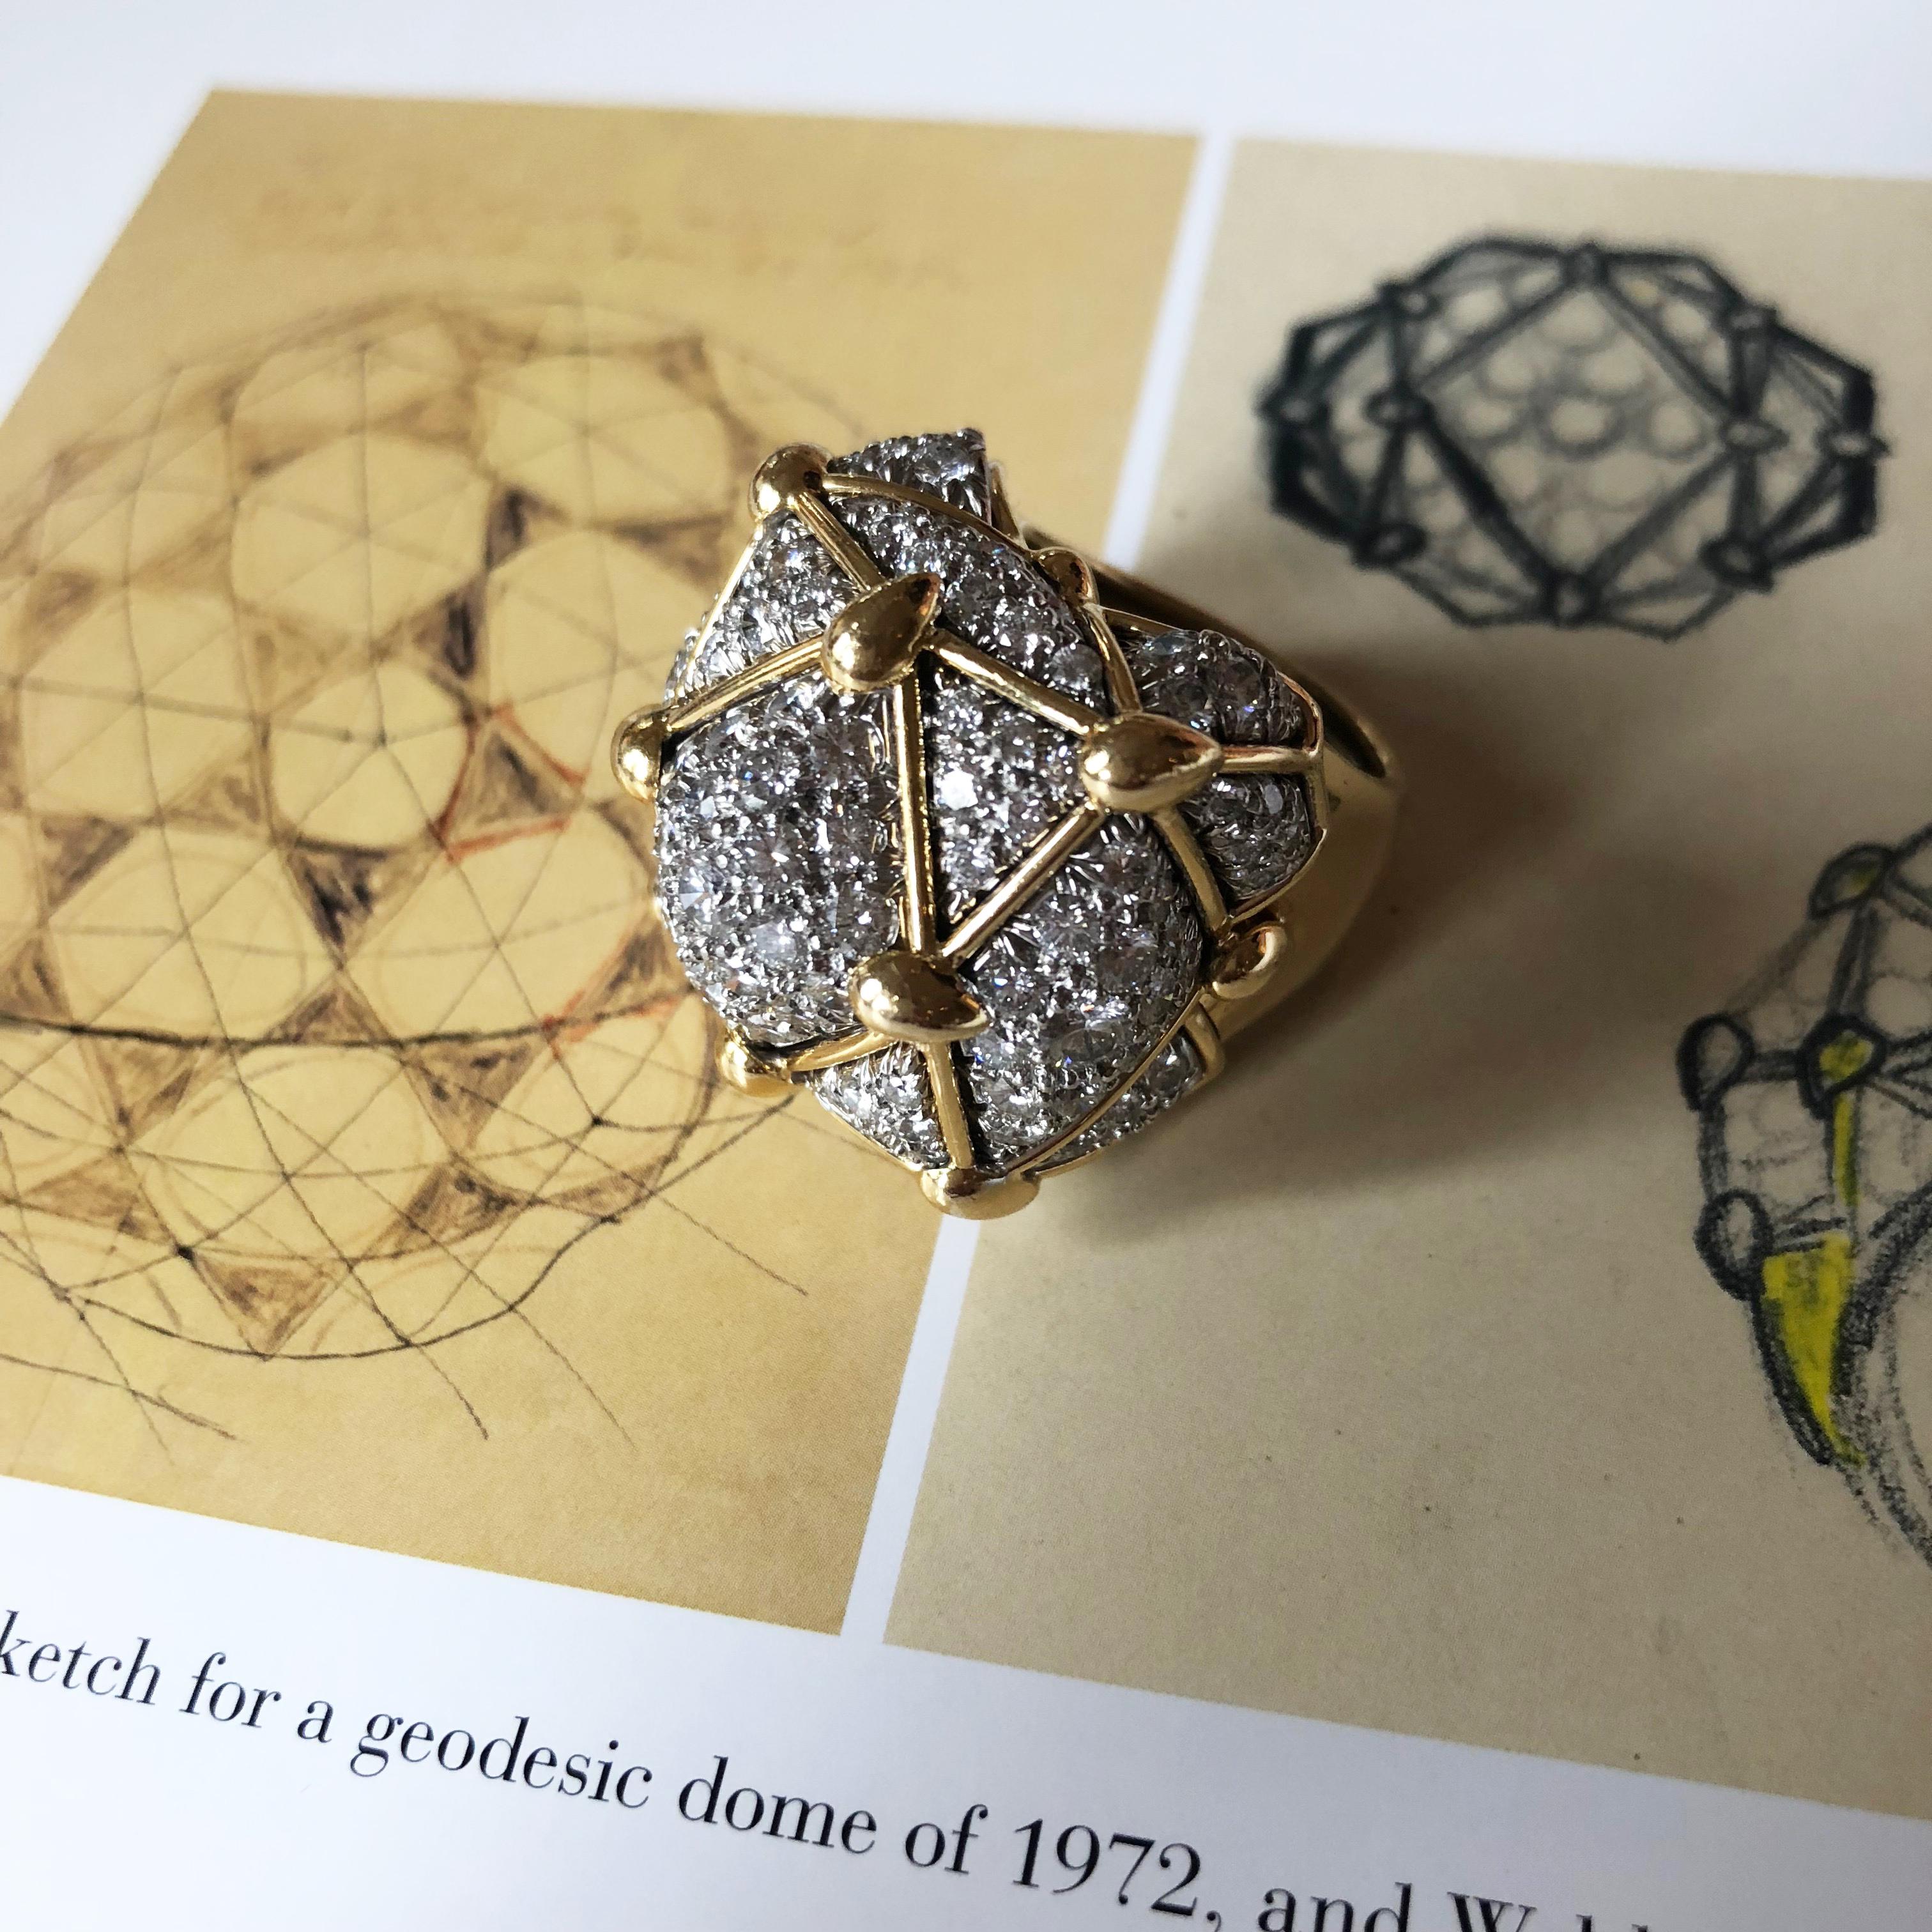 A pavé-set diamond, platinum, and 18 karat gold Geodesic Dome ring, by David Webb, first made in c. 1965.

The ring measures a Size 05¾. It is signed WEBB, stamped 18k, and Plat. The ring has approximately 119 diamonds weighing 5 - 6 carats